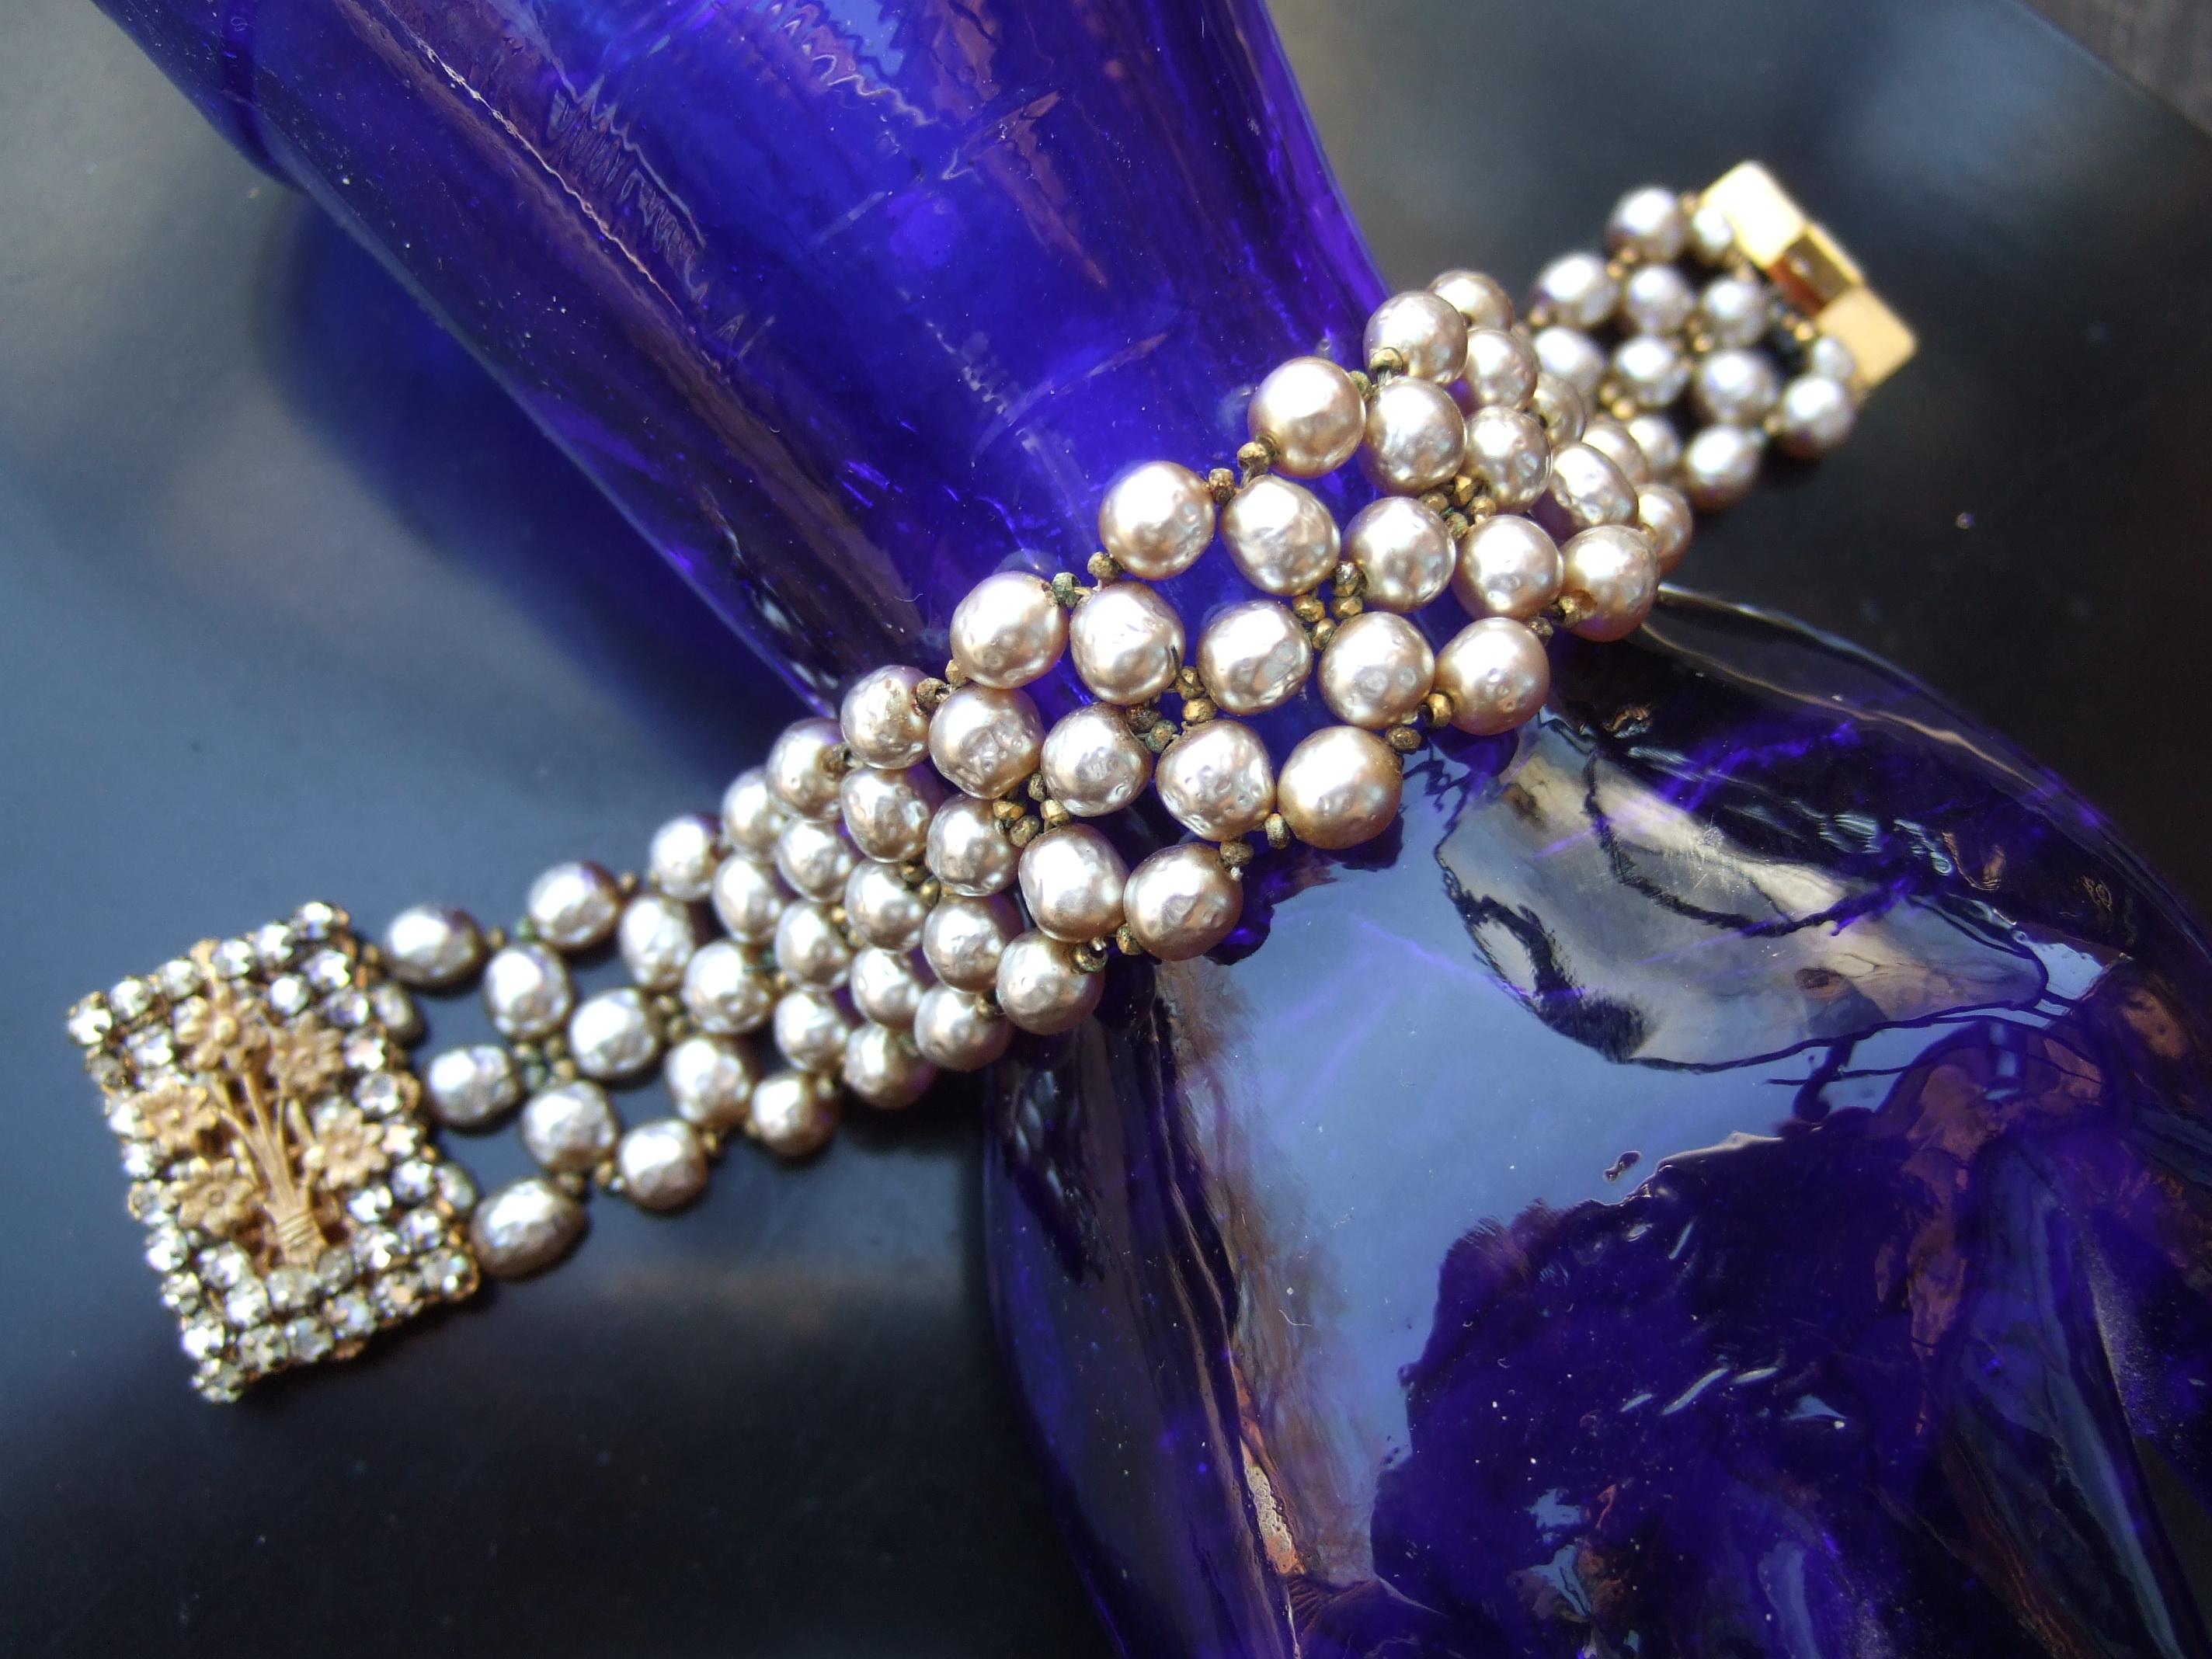 Miriam Haskell Baroque glass enamel pearl bracelet c 1960
The elegant costume bracelet is designed with five rows
of lustrous glass enamel baroque style pearls 

The rectangular clasp medallion is encrusted with glittering 
prong set diamante